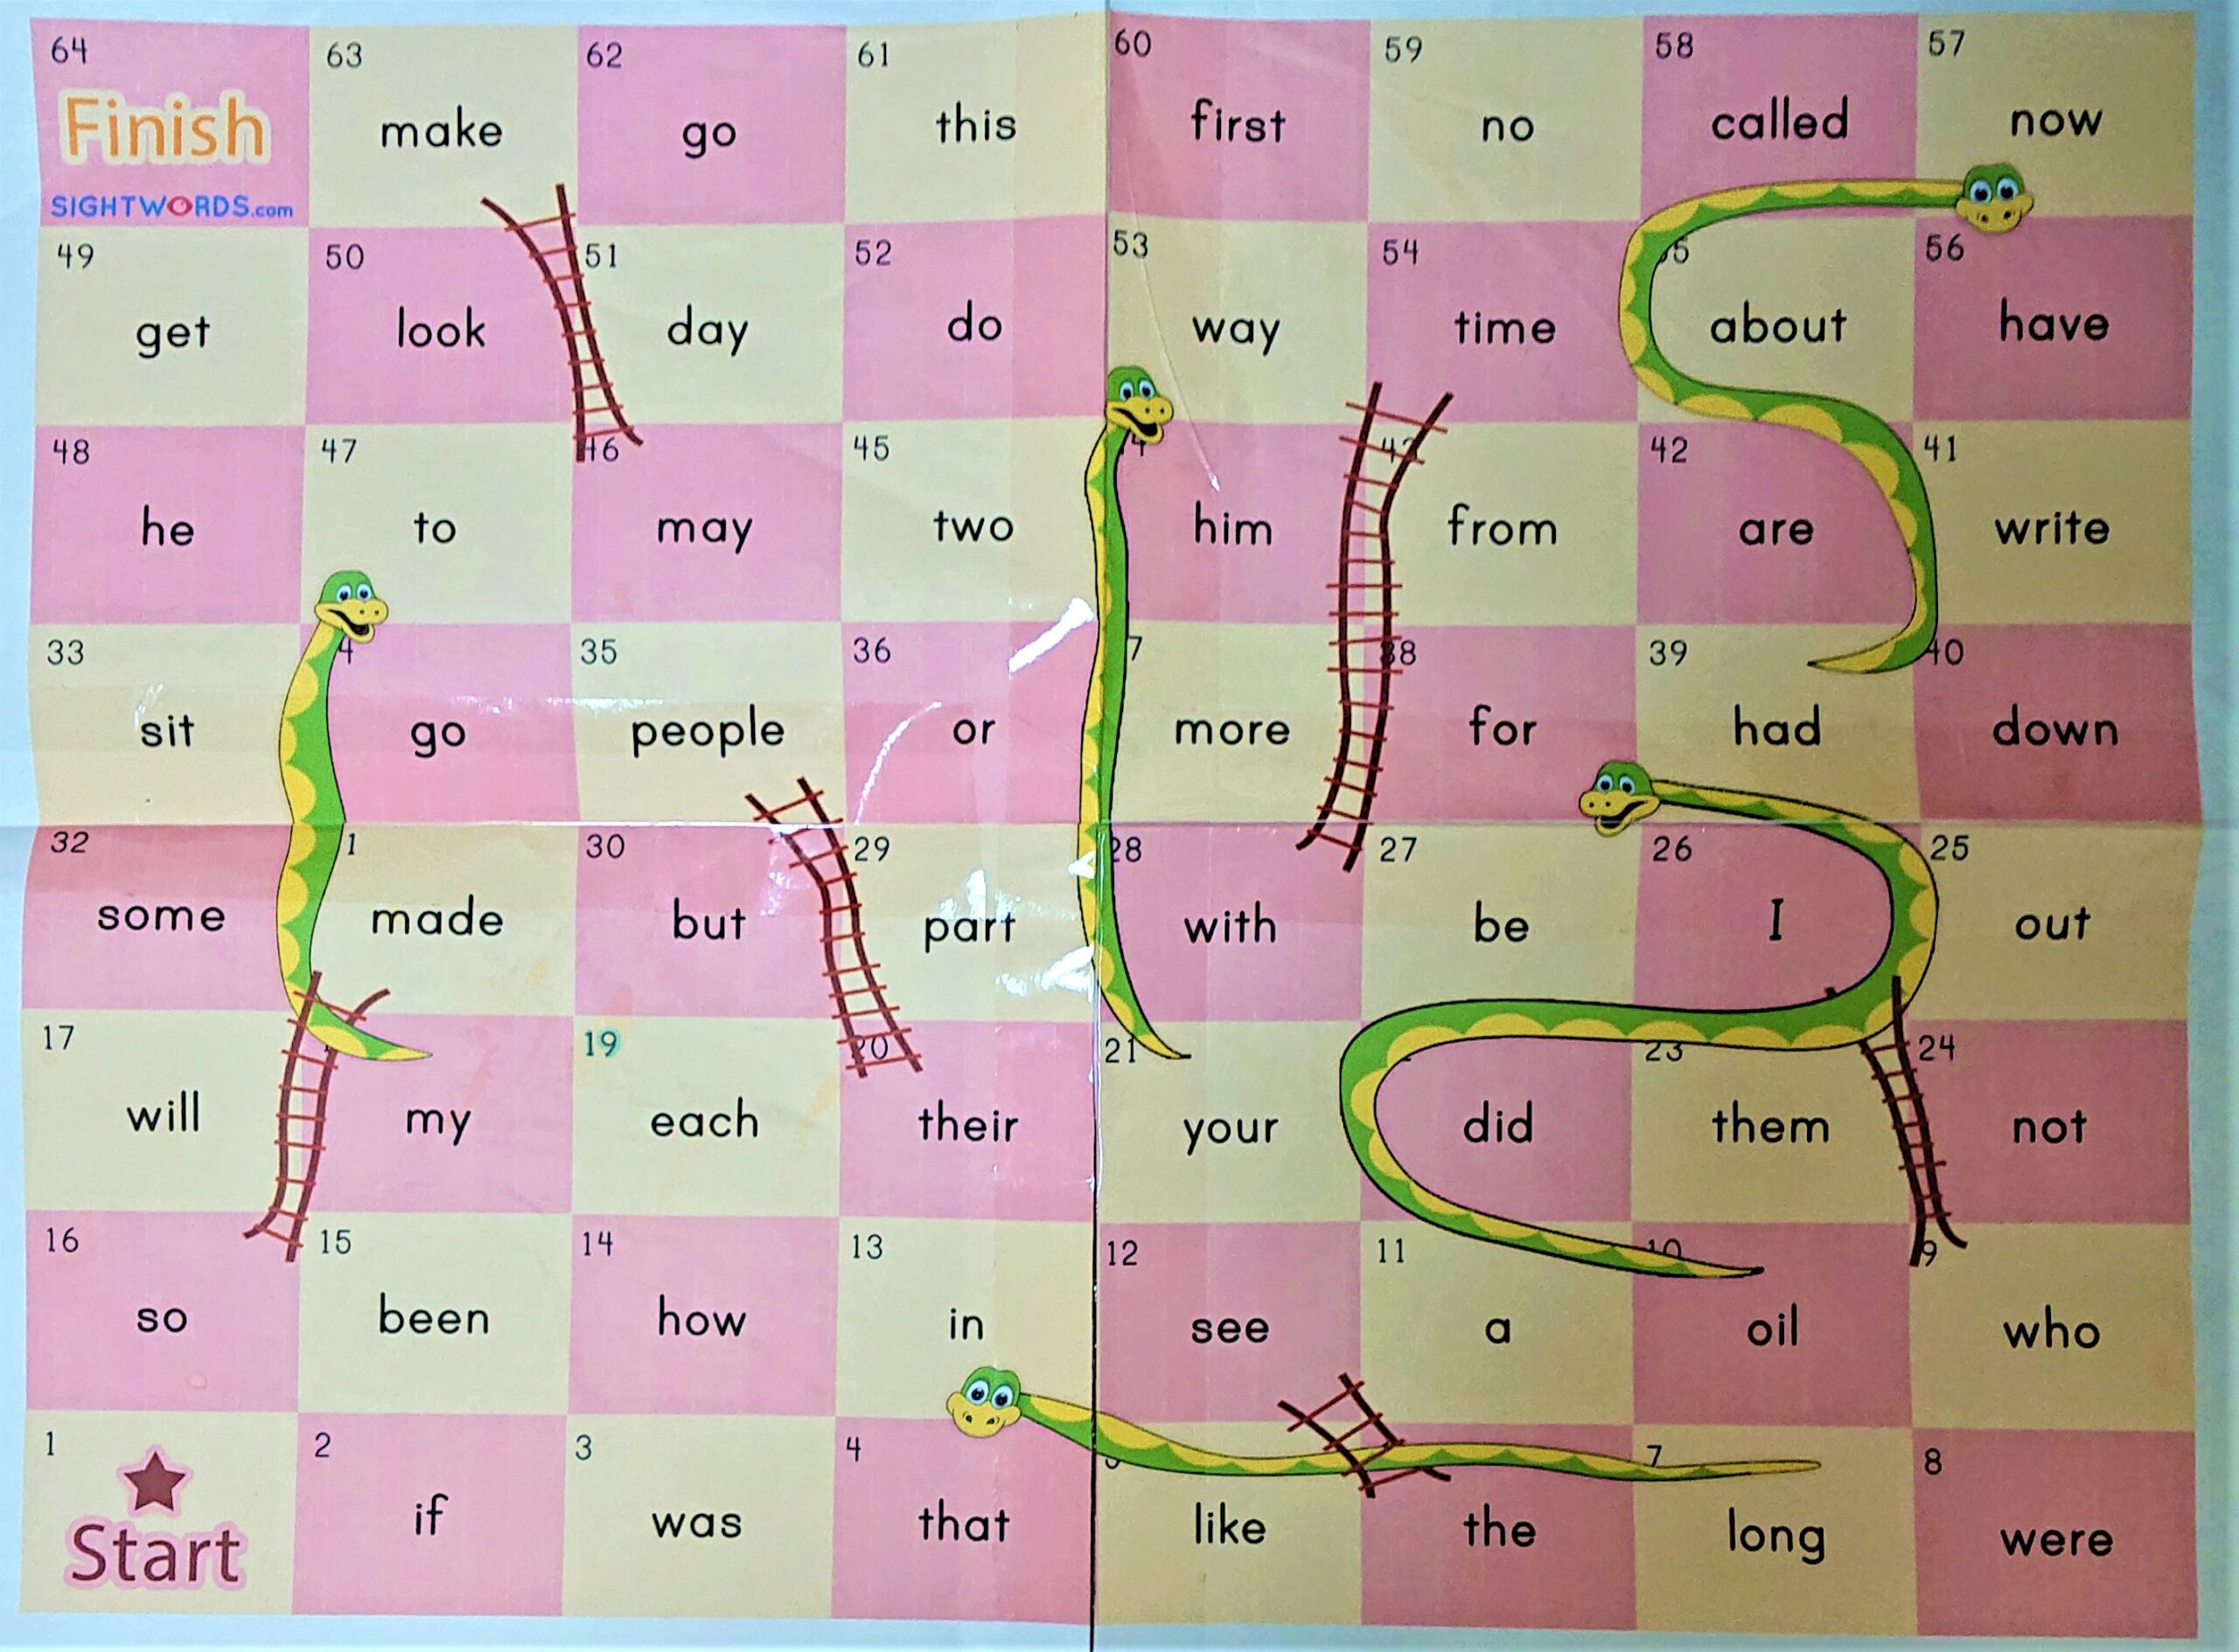 Sight Words Snakes & Laddersすごろく